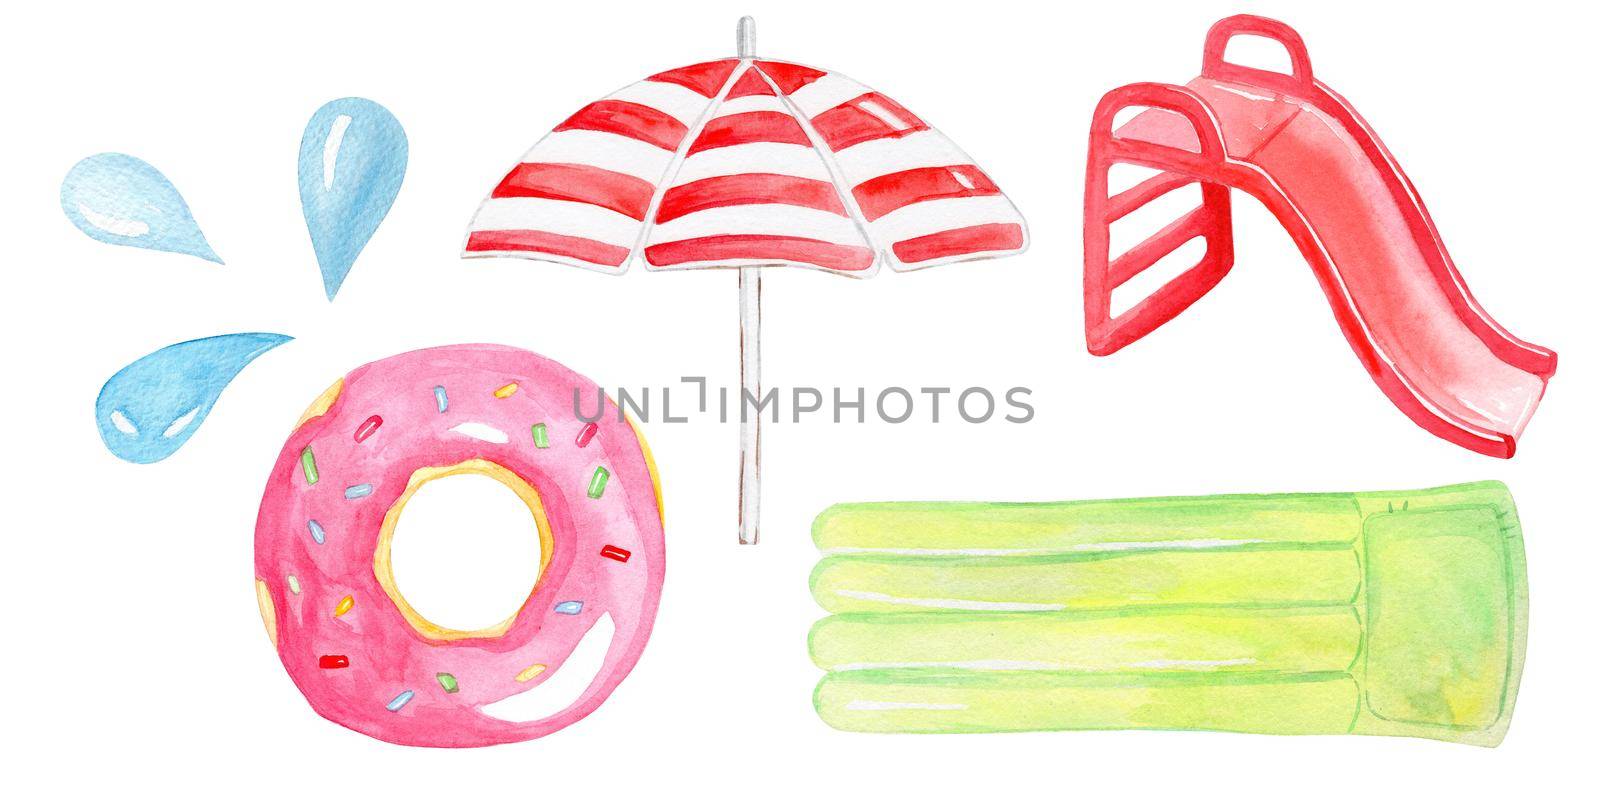 watercolor hand drawn rubber floats for swimming pool and vacation set isolated on white background by dreamloud